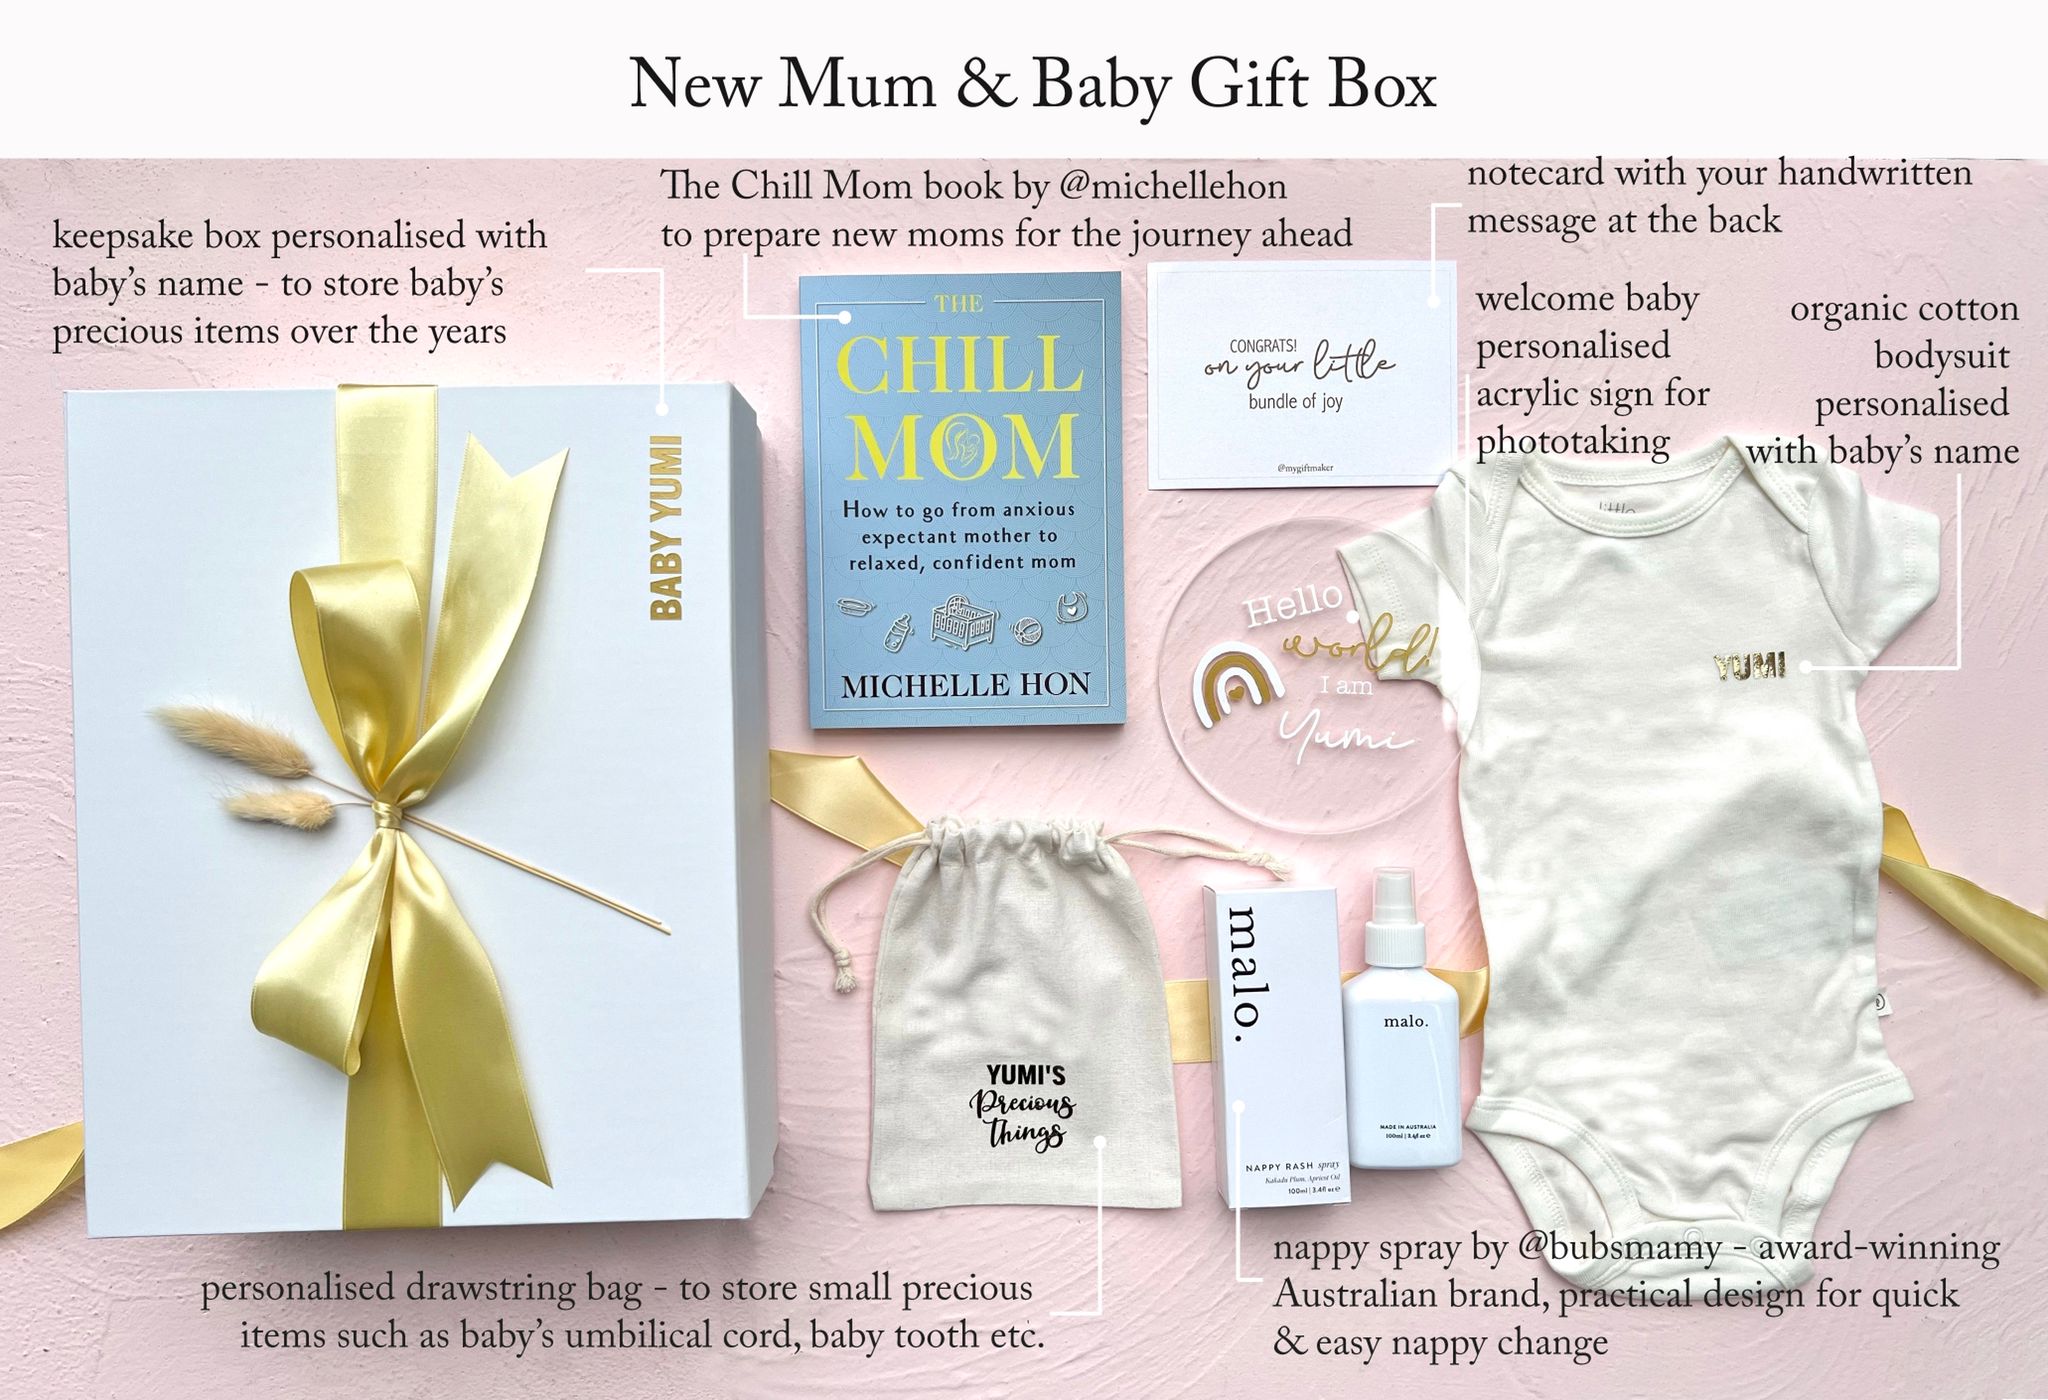 What's in the Newborn Gift Set?